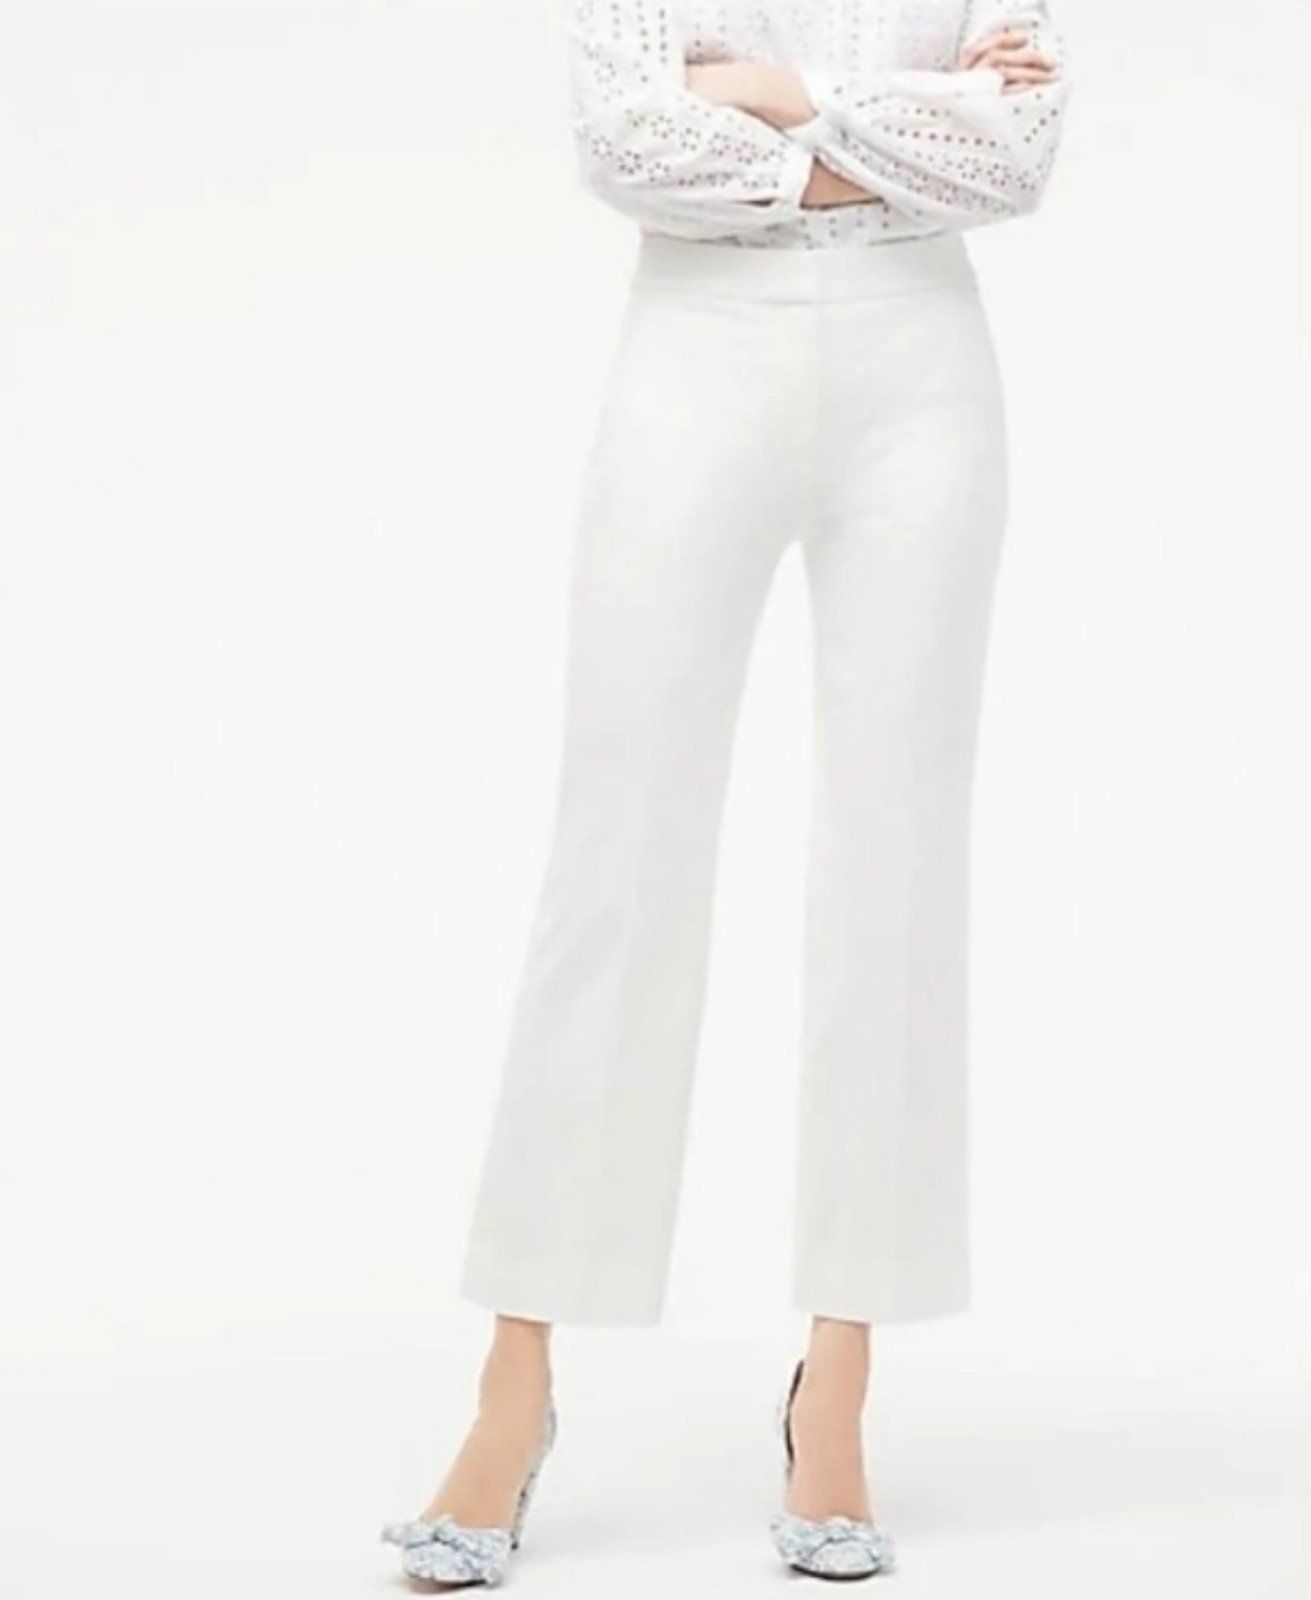 Fashion J. Crew Hayden White Cropped Pant 4 Kick Crop OL5fVcAcw US Outlet